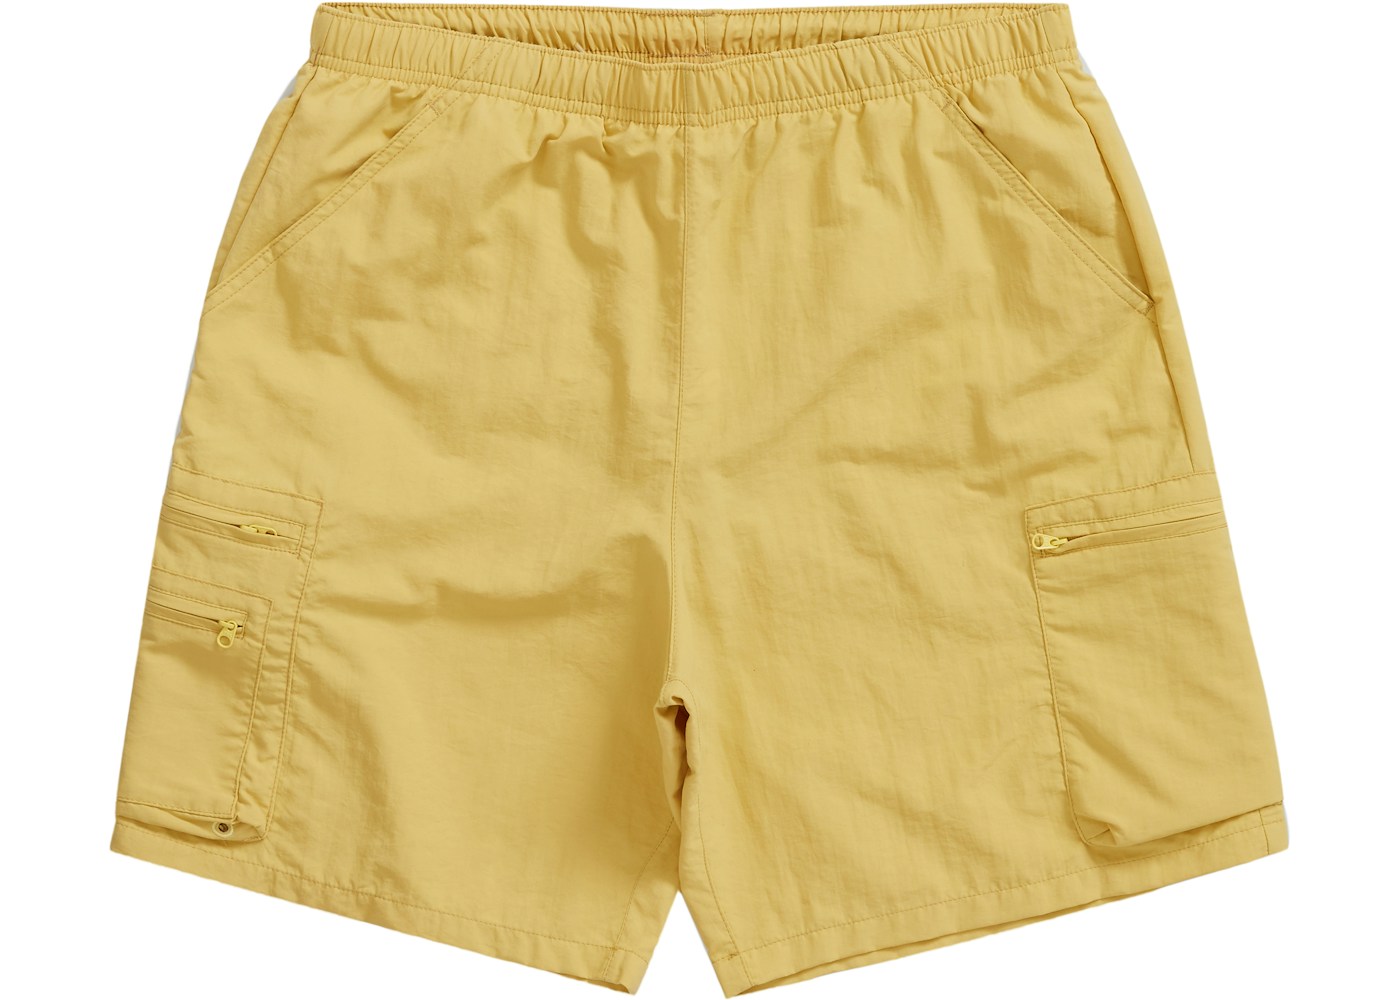 Supreme Cargo Water Short Pale Yellow - SS21